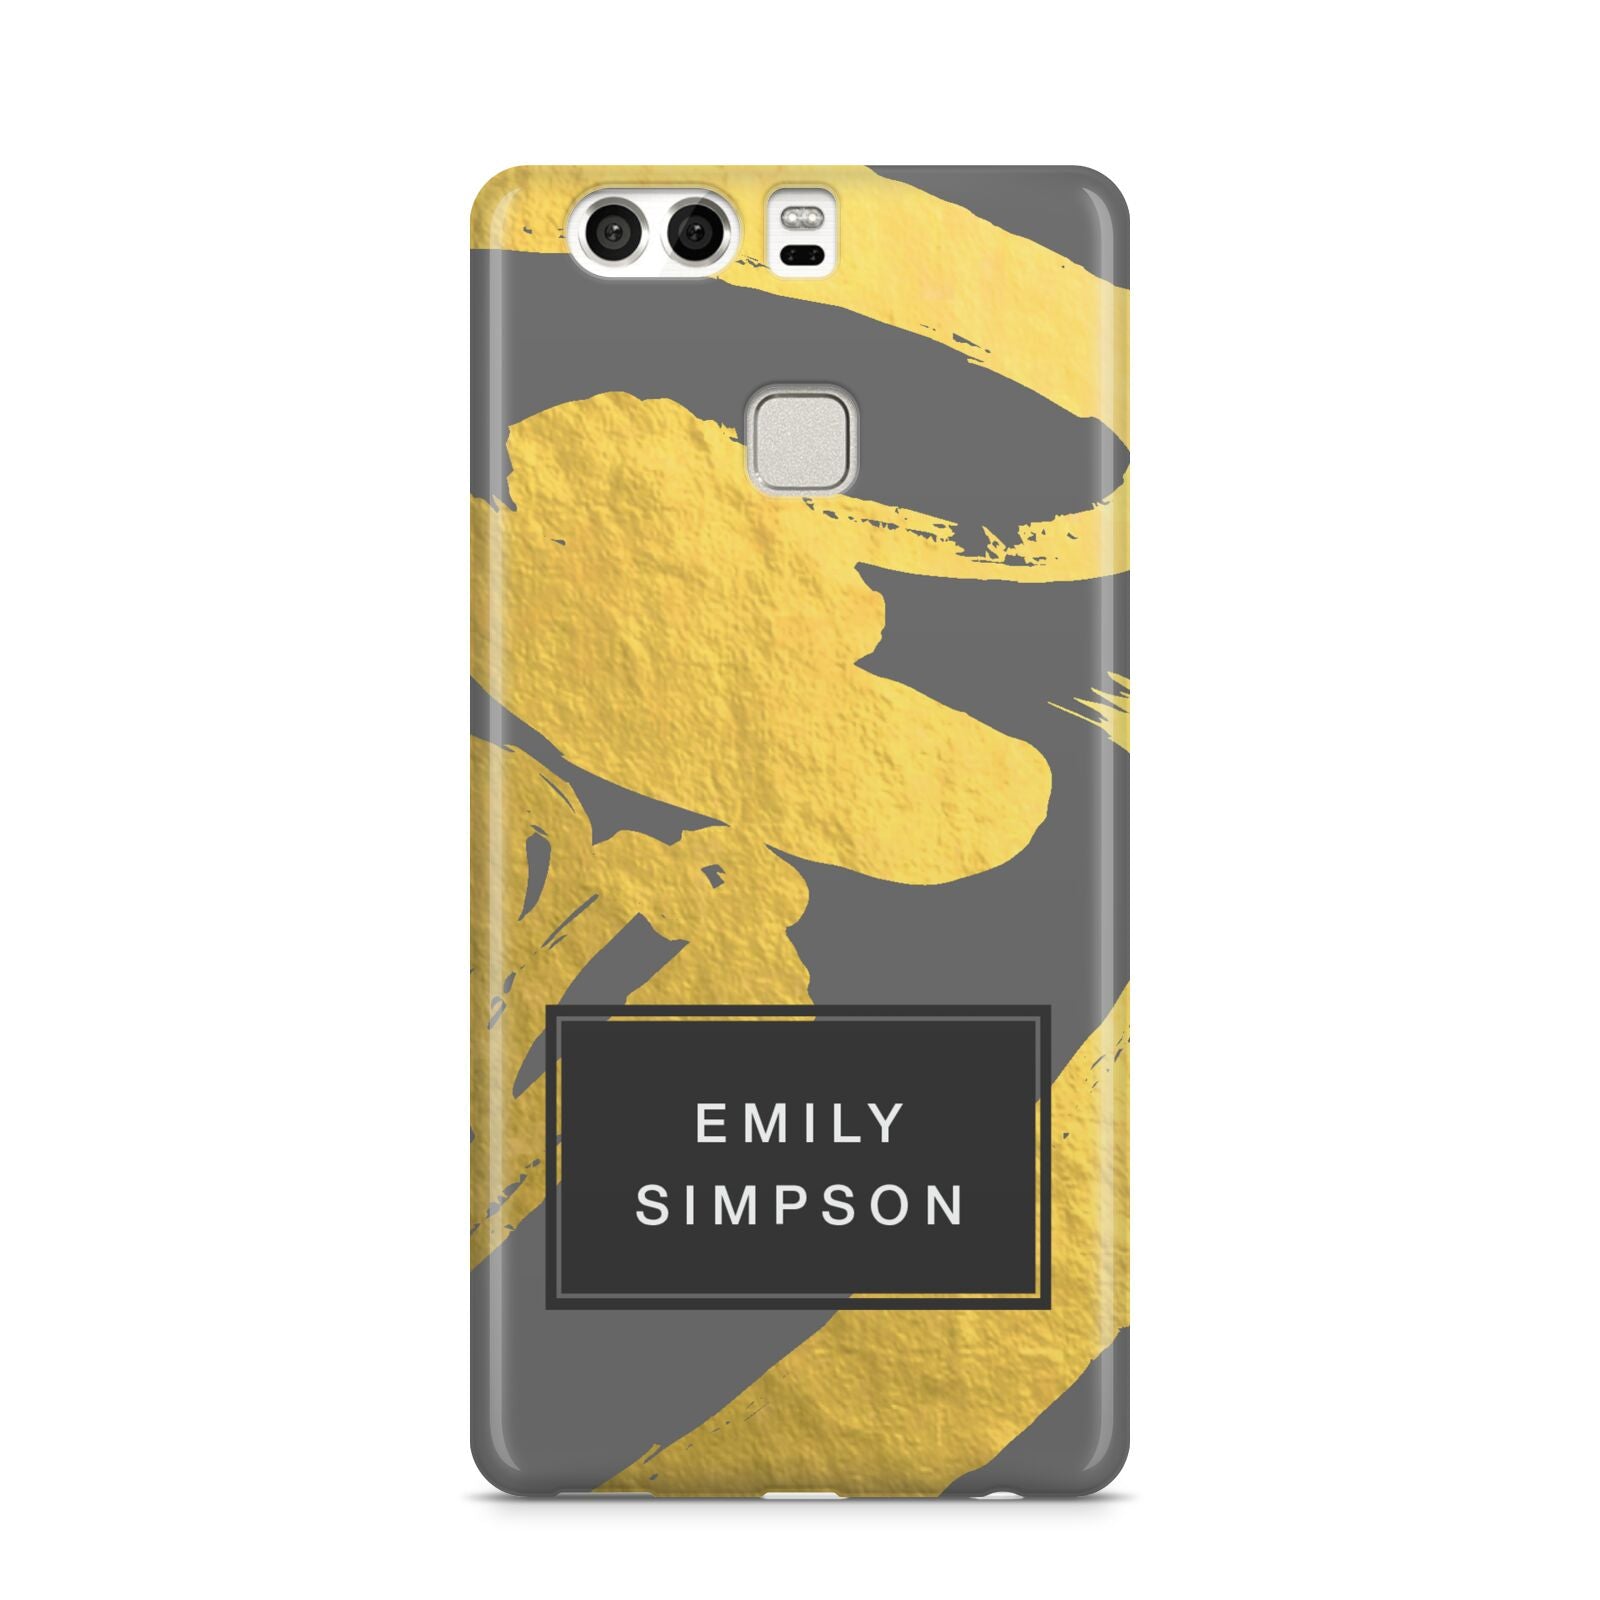 Personalised Gold Leaf Grey With Name Huawei P9 Case